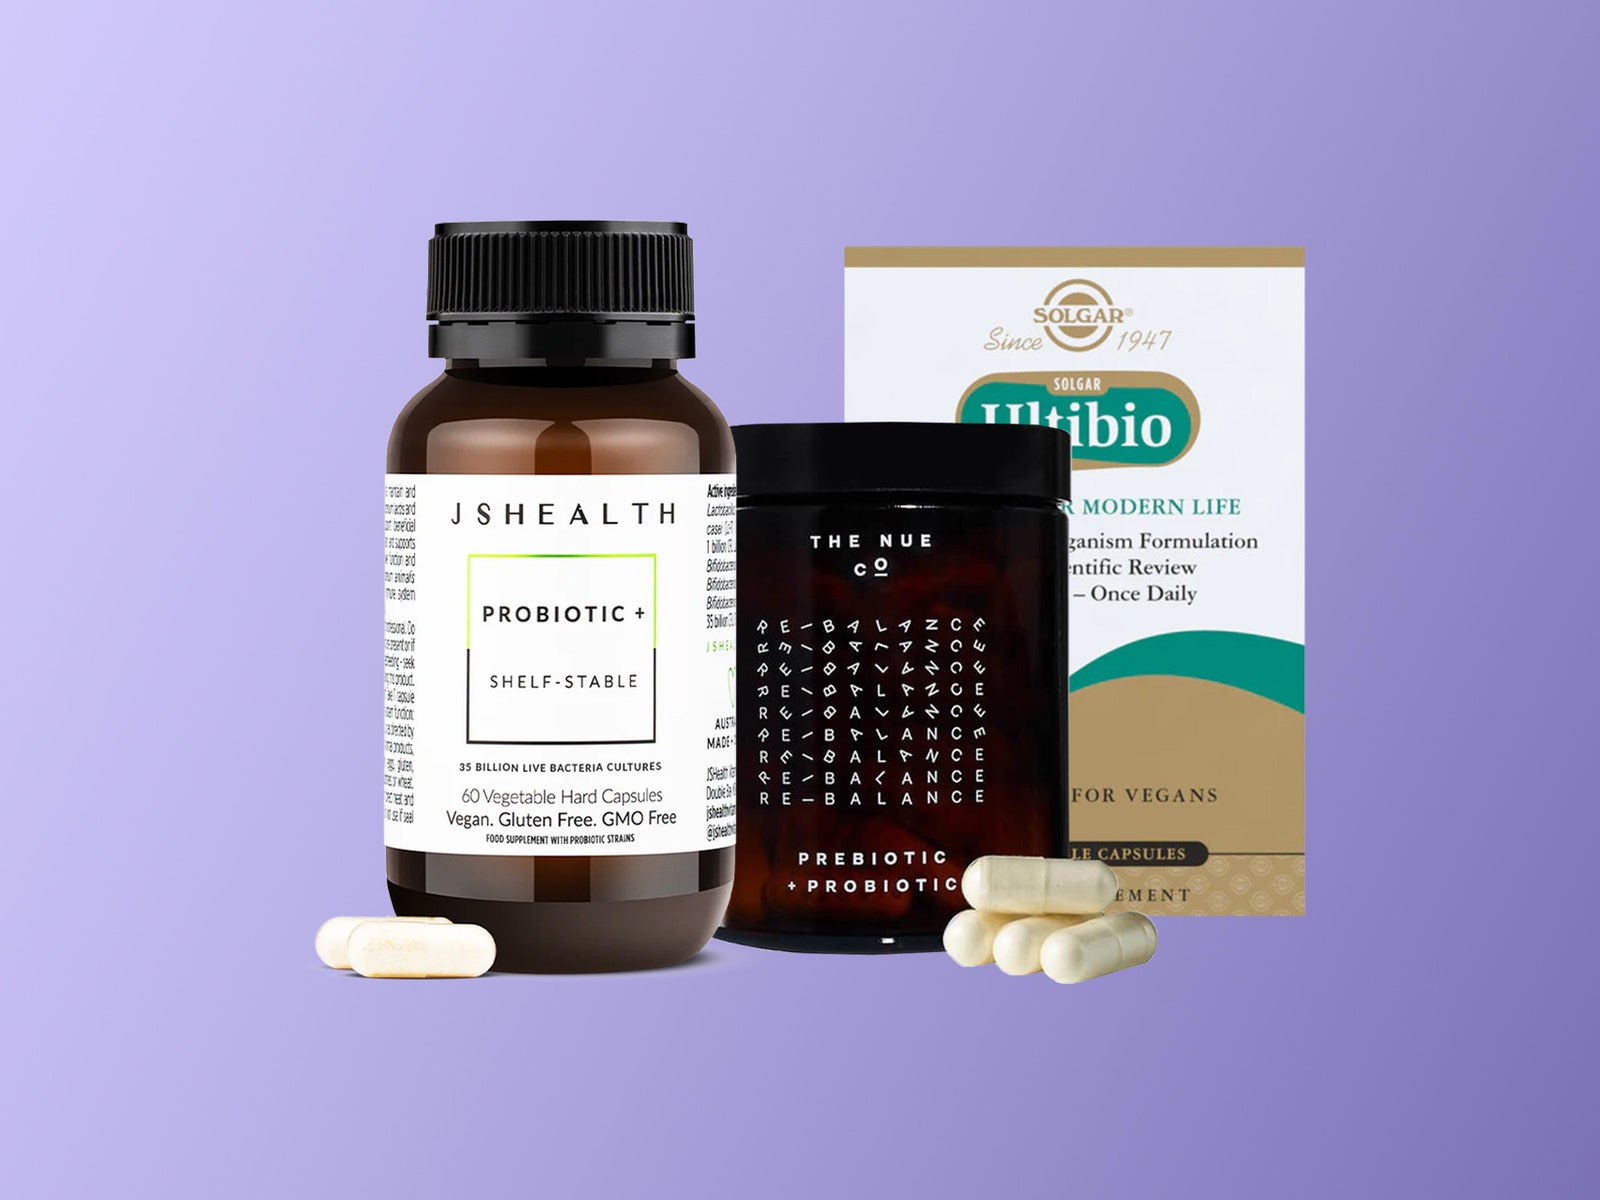 Looking for probiotics? These are the best formulas on the market, according to gut health experts and nutritionists